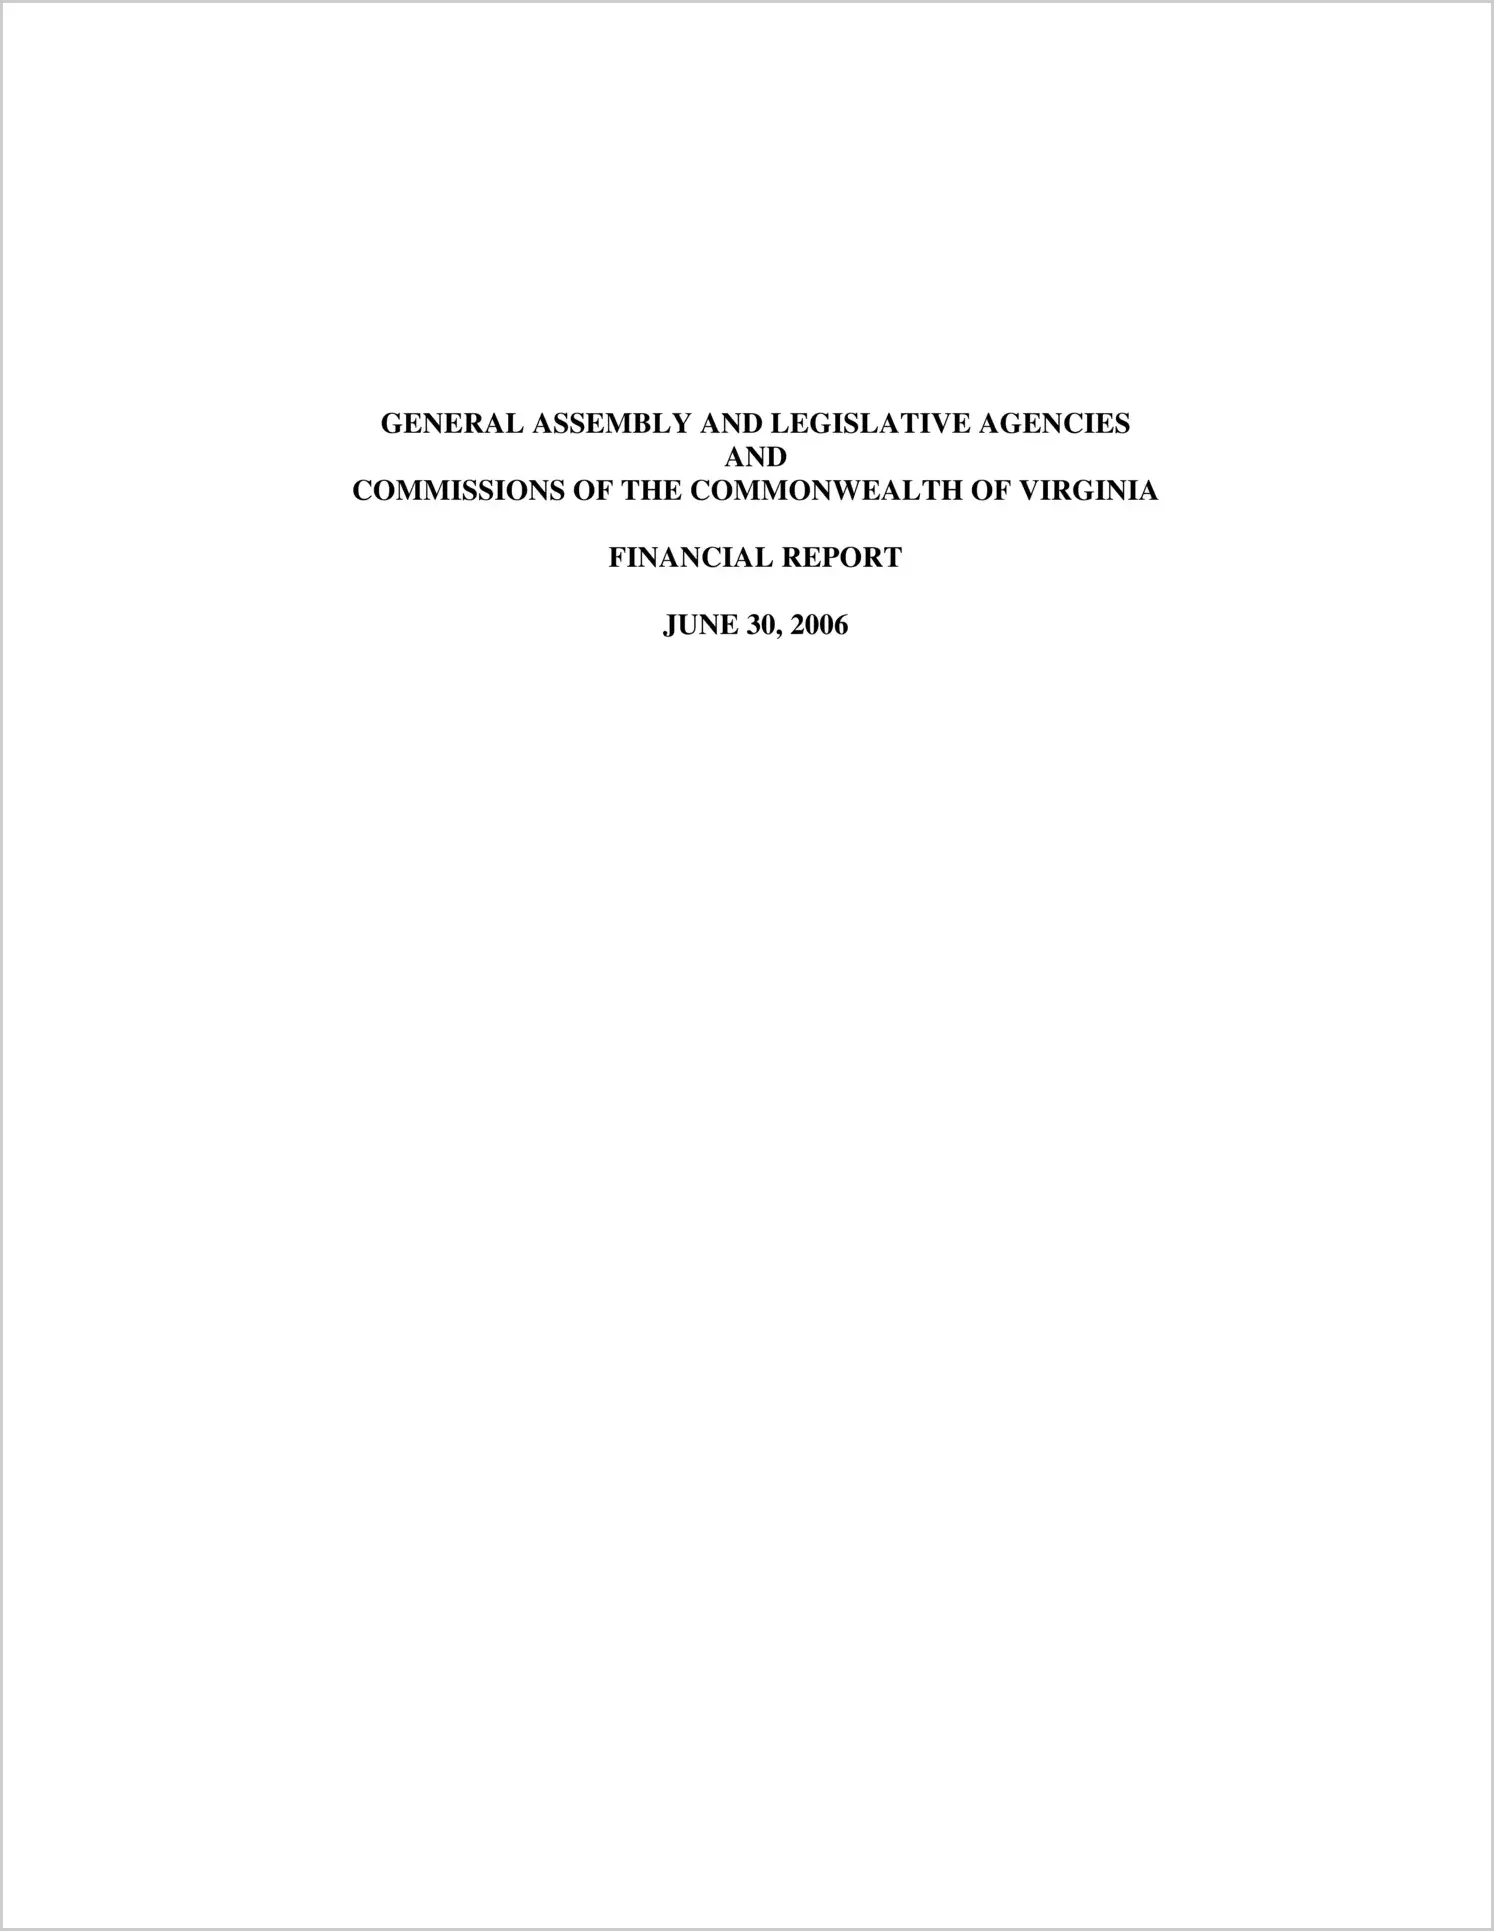 General Assembly and Legislative Agencies and Commissions of the Commonwealth of Virginia Financial Report For The Fiscal Year ended June 30, 2006